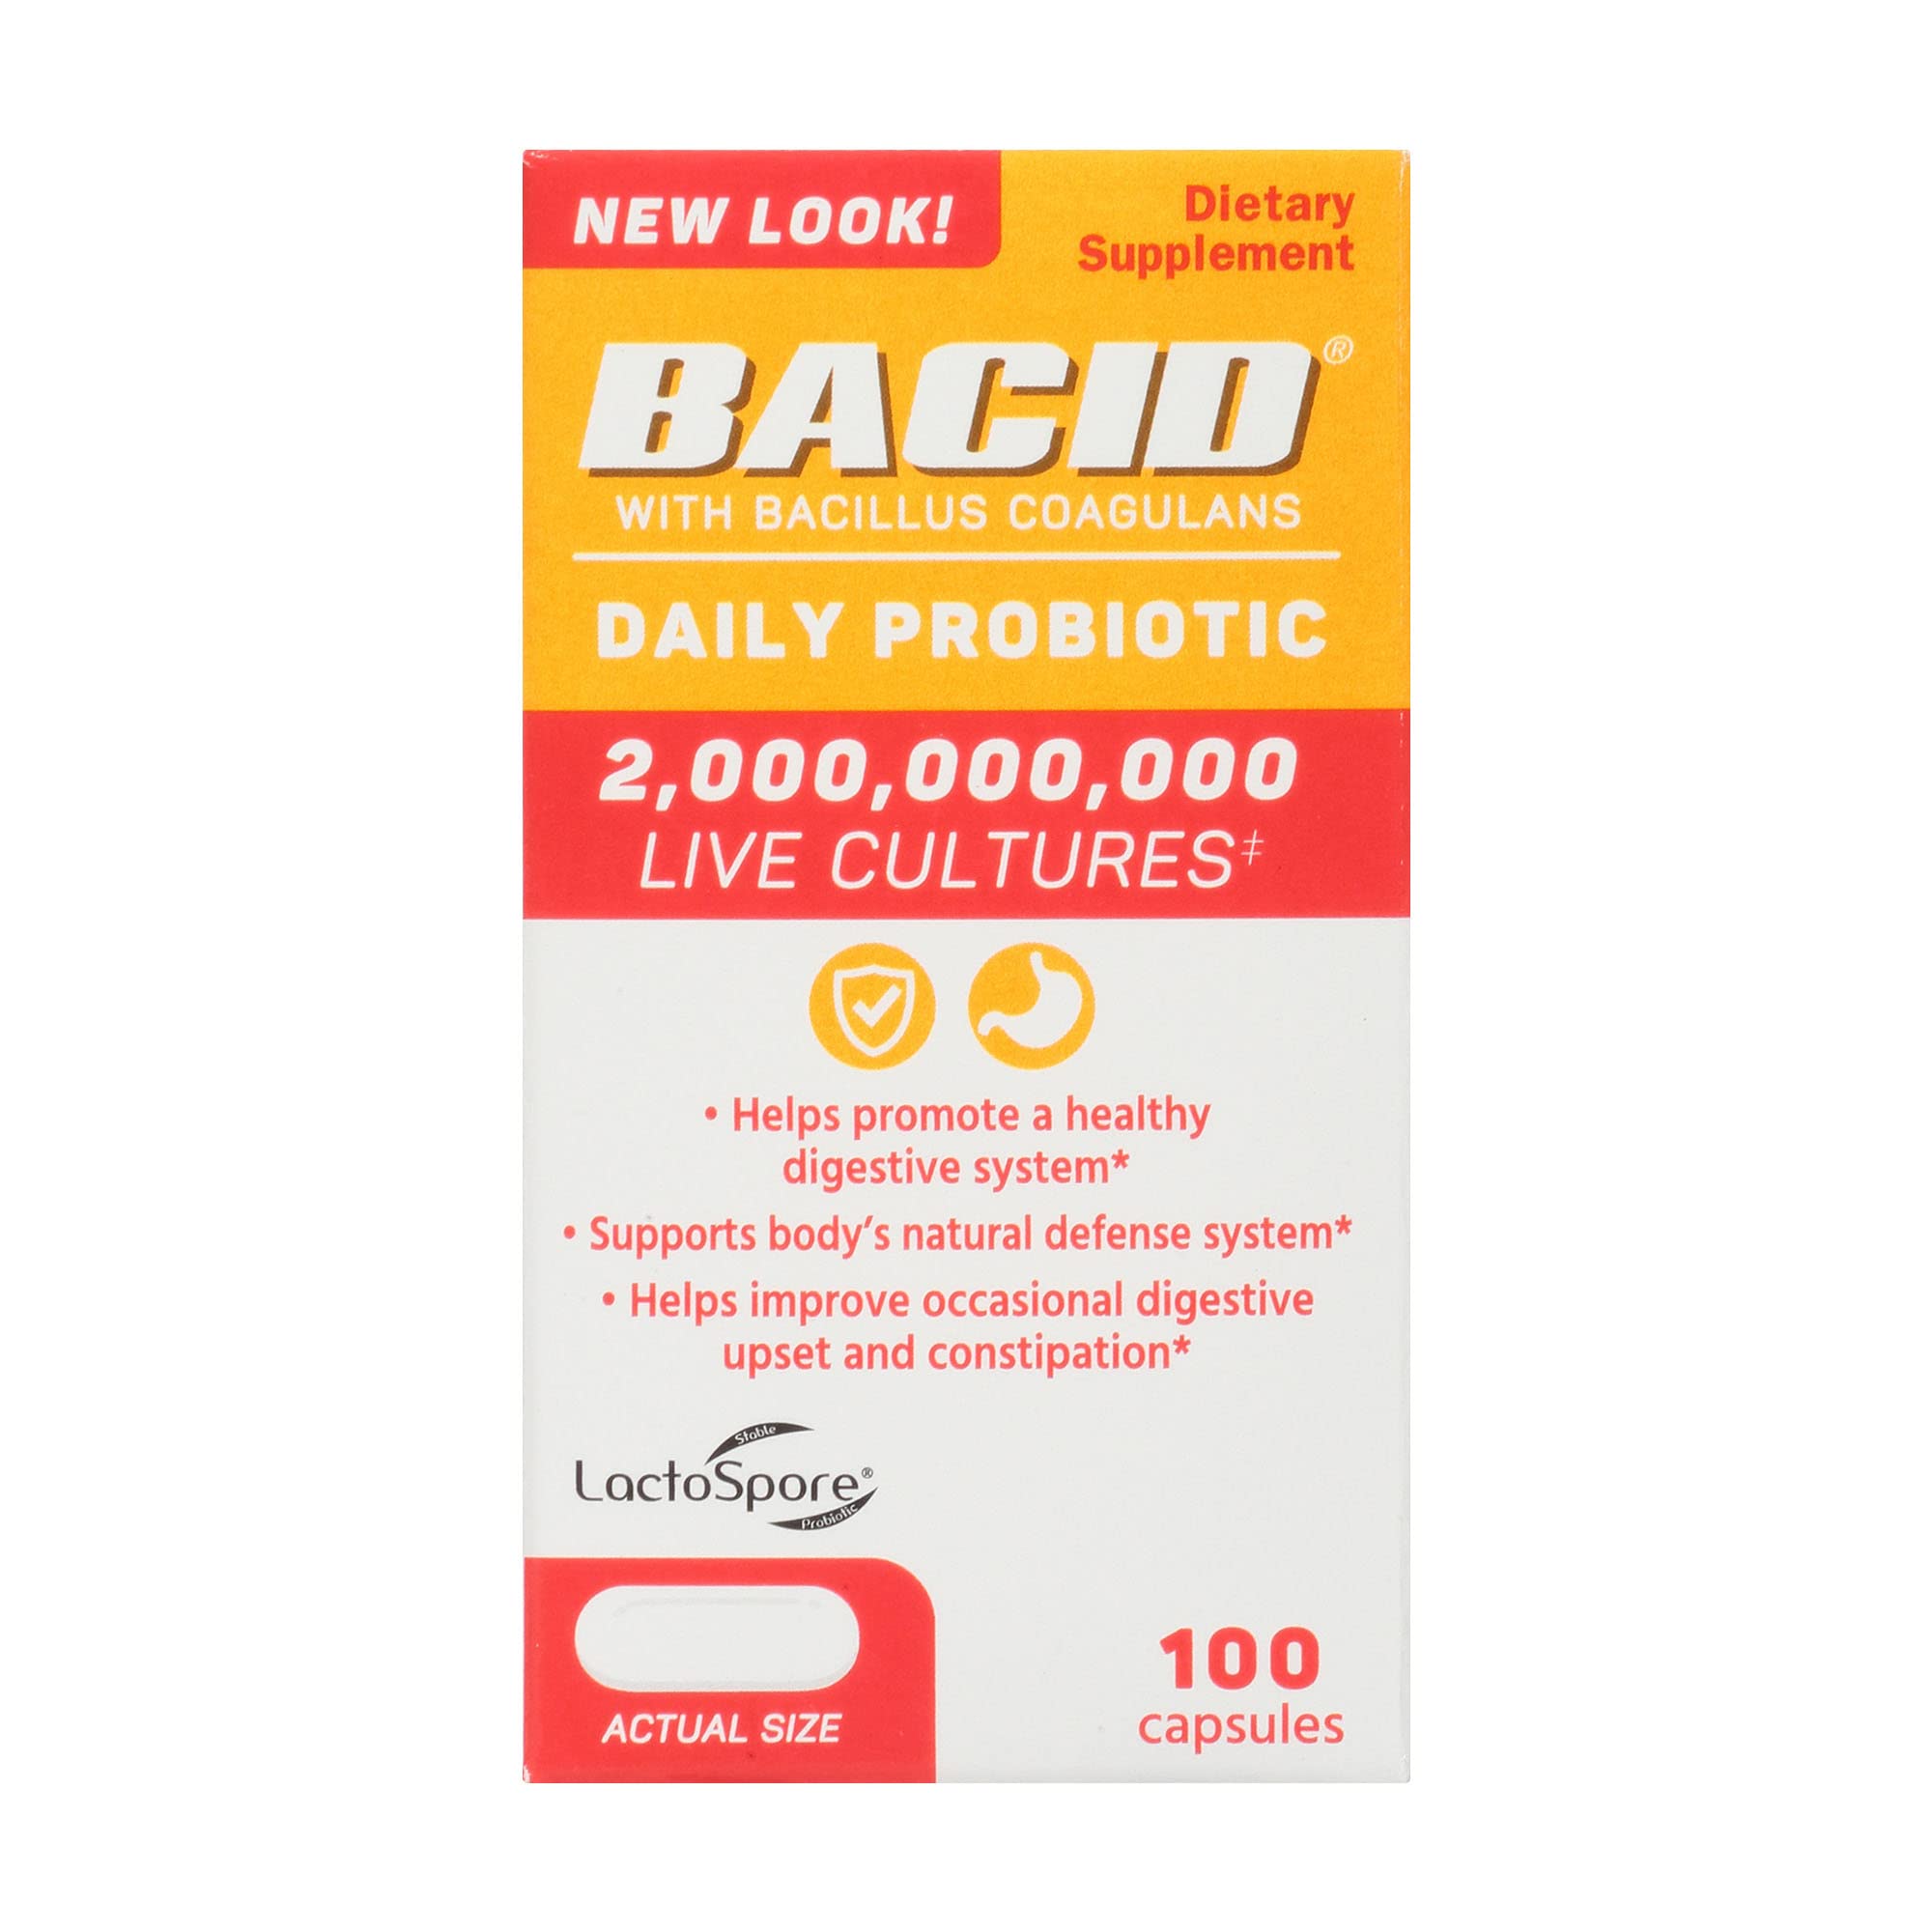 BACID Daily Probiotic with Bacillus Coagulans for Digestive Health, White, 100 Count